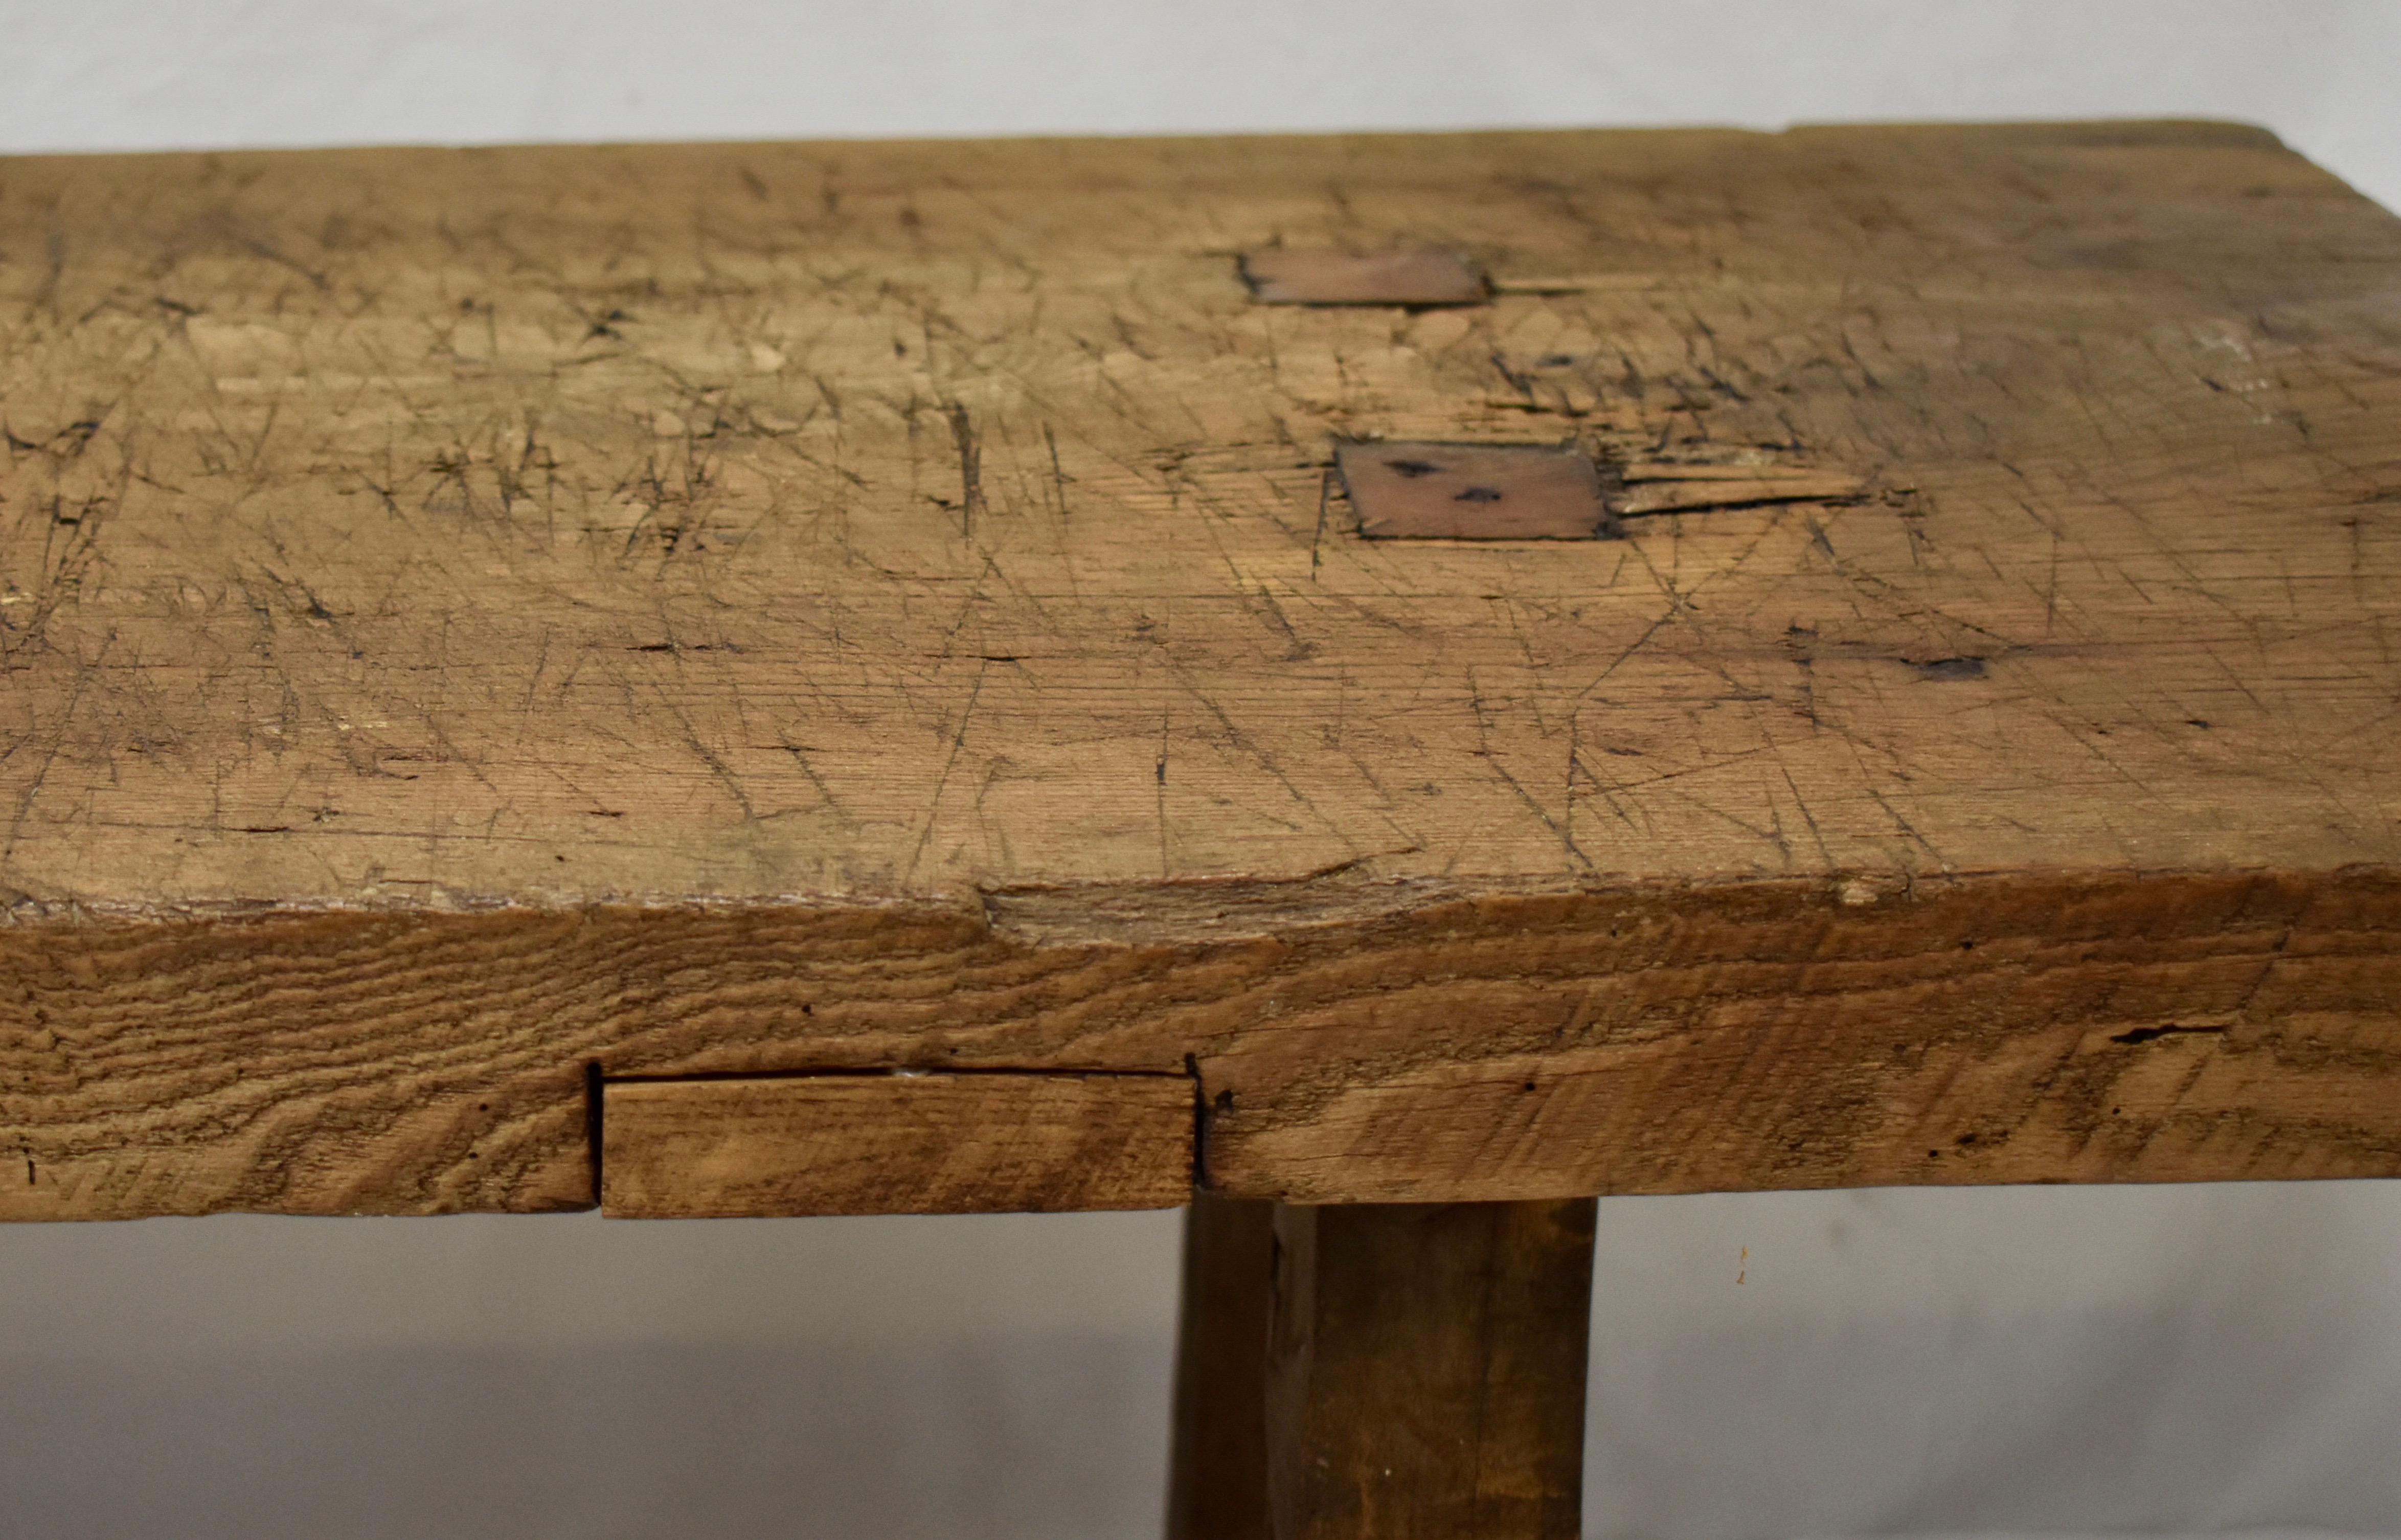 20th Century Oak Pig Bench Coffee Table